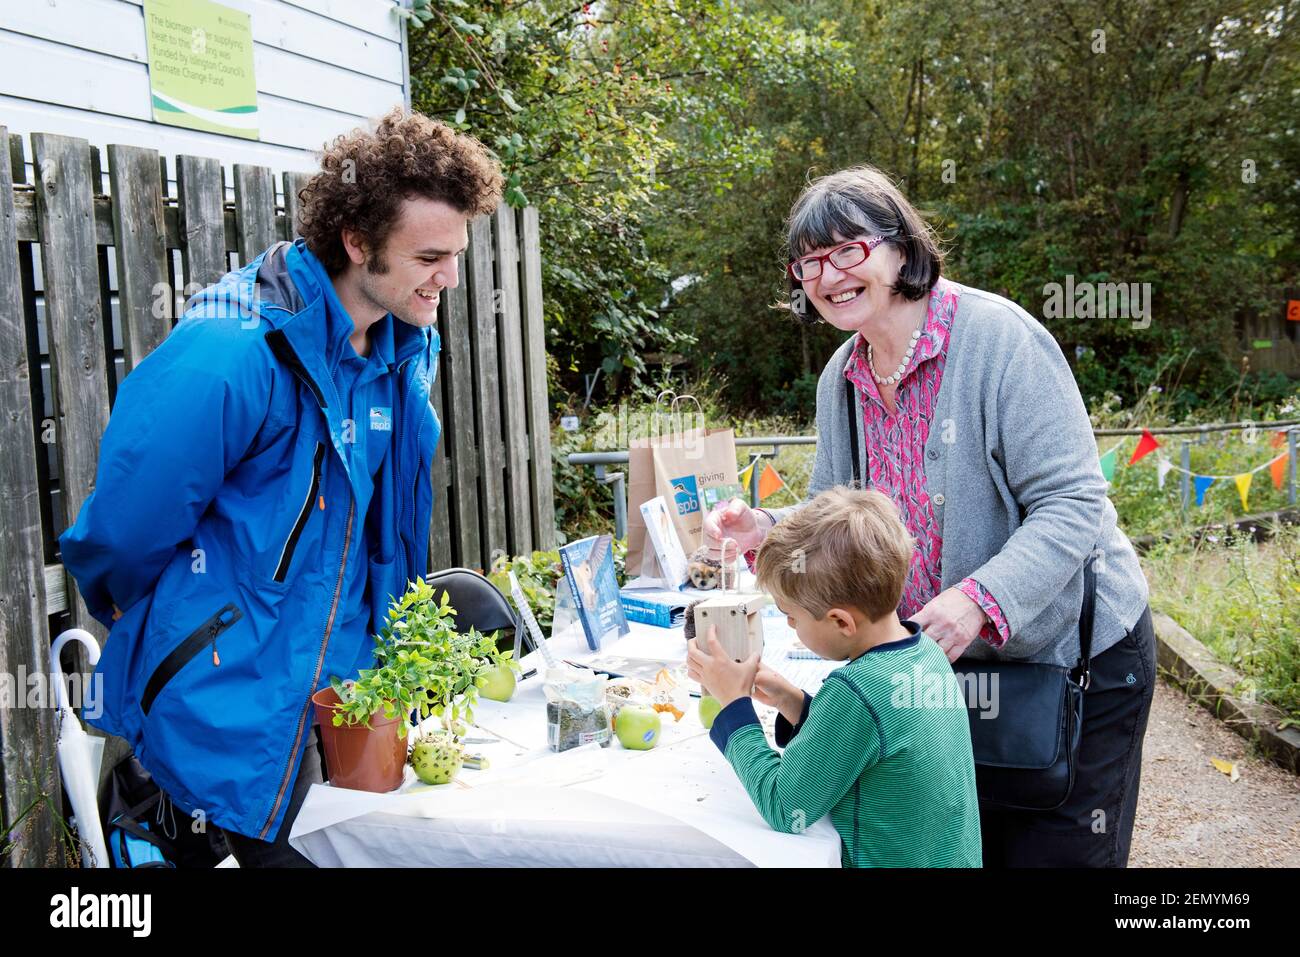 RSPB Stall with man talking to lady and small boy who holds a bird box in his hand, Apple Day Gillespie Ecology Park Stock Photo